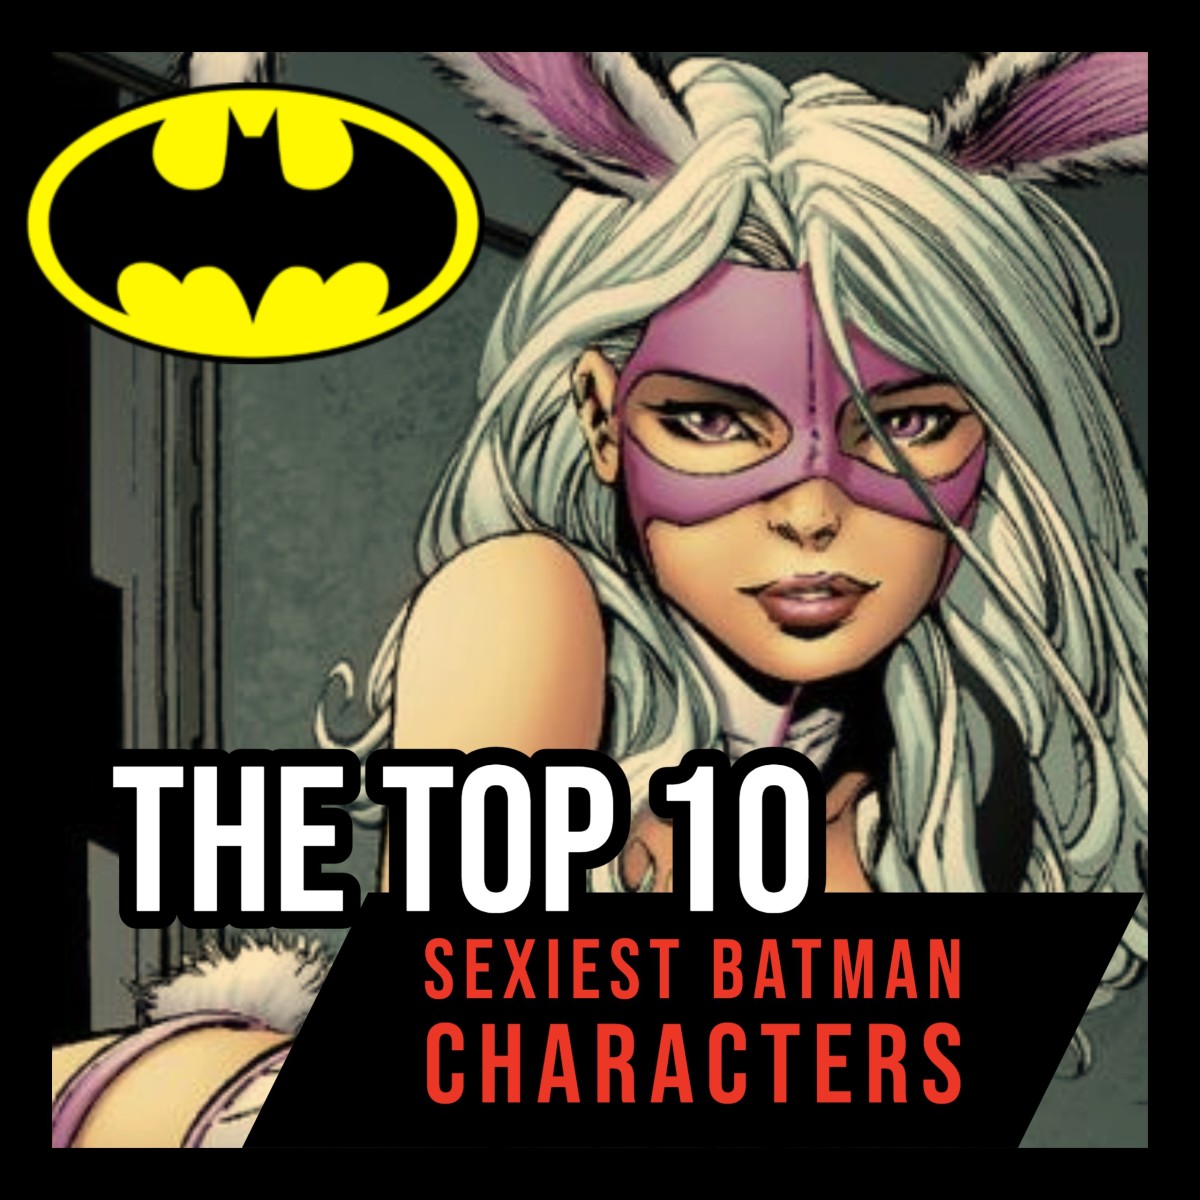 The Top 10 Sexiest Batman Characters